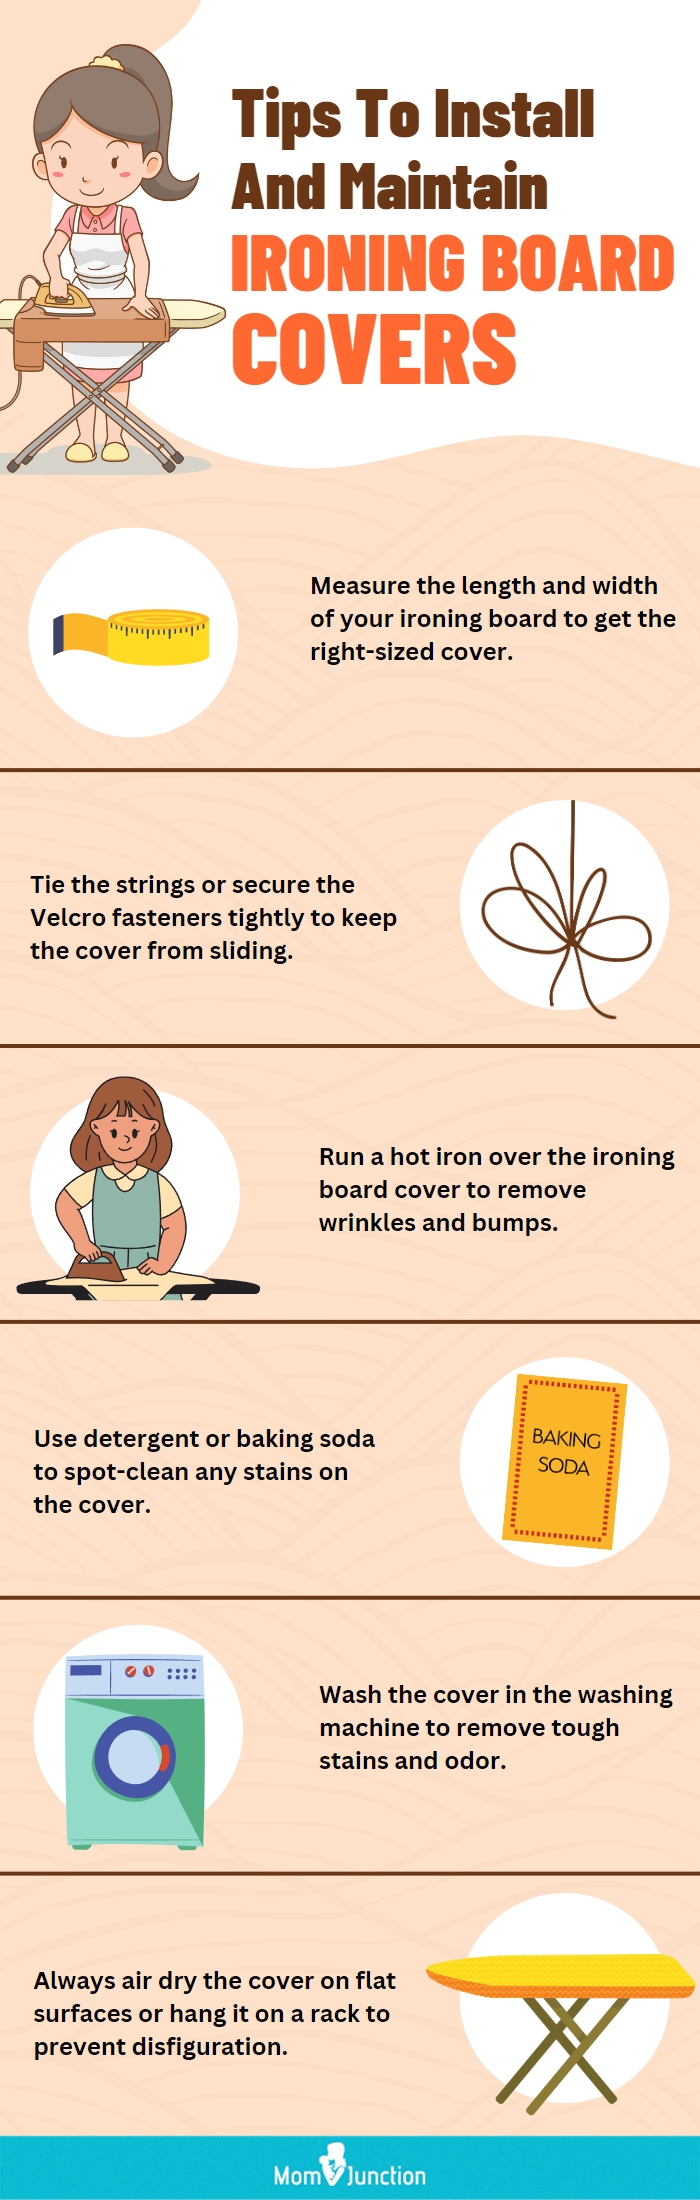 Tips To Install And Maintain Ironing Board Covers (infographic)